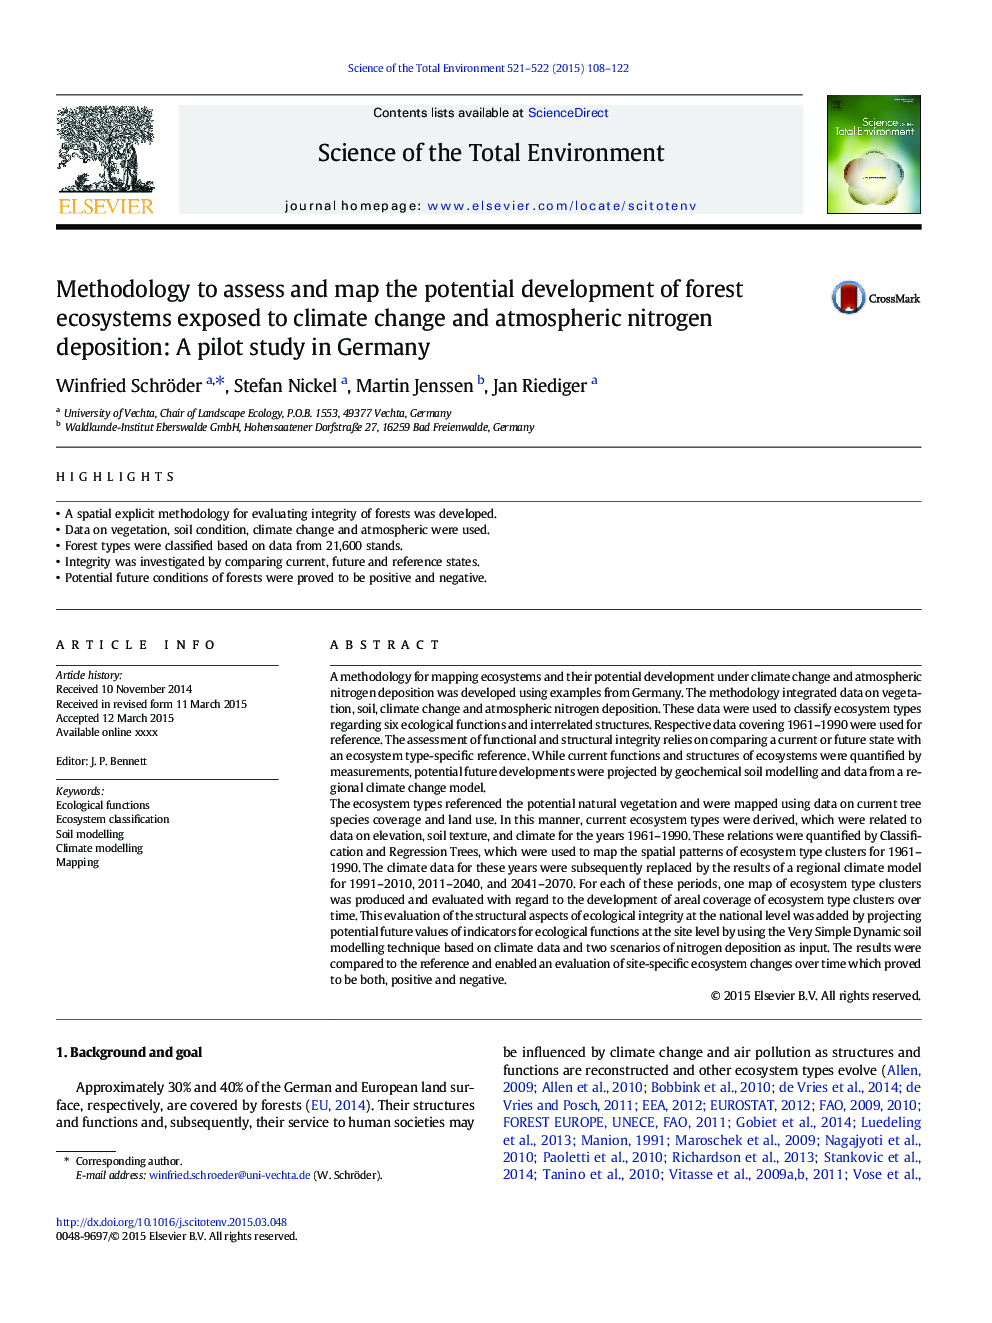 Methodology to assess and map the potential development of forest ecosystems exposed to climate change and atmospheric nitrogen deposition: A pilot study in Germany